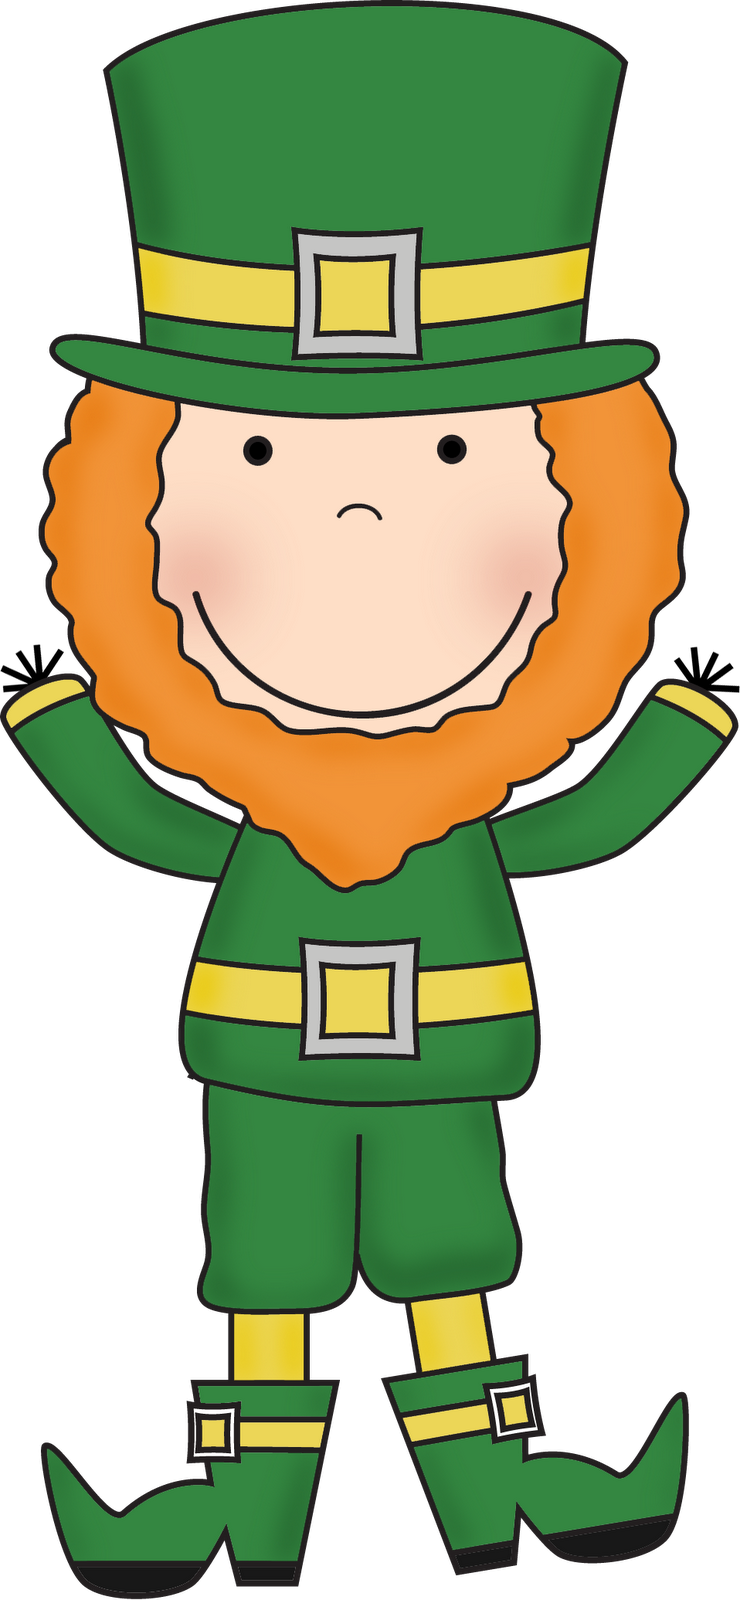 free-coloring-pages-of-leprechauns-free-download-goodimg-co